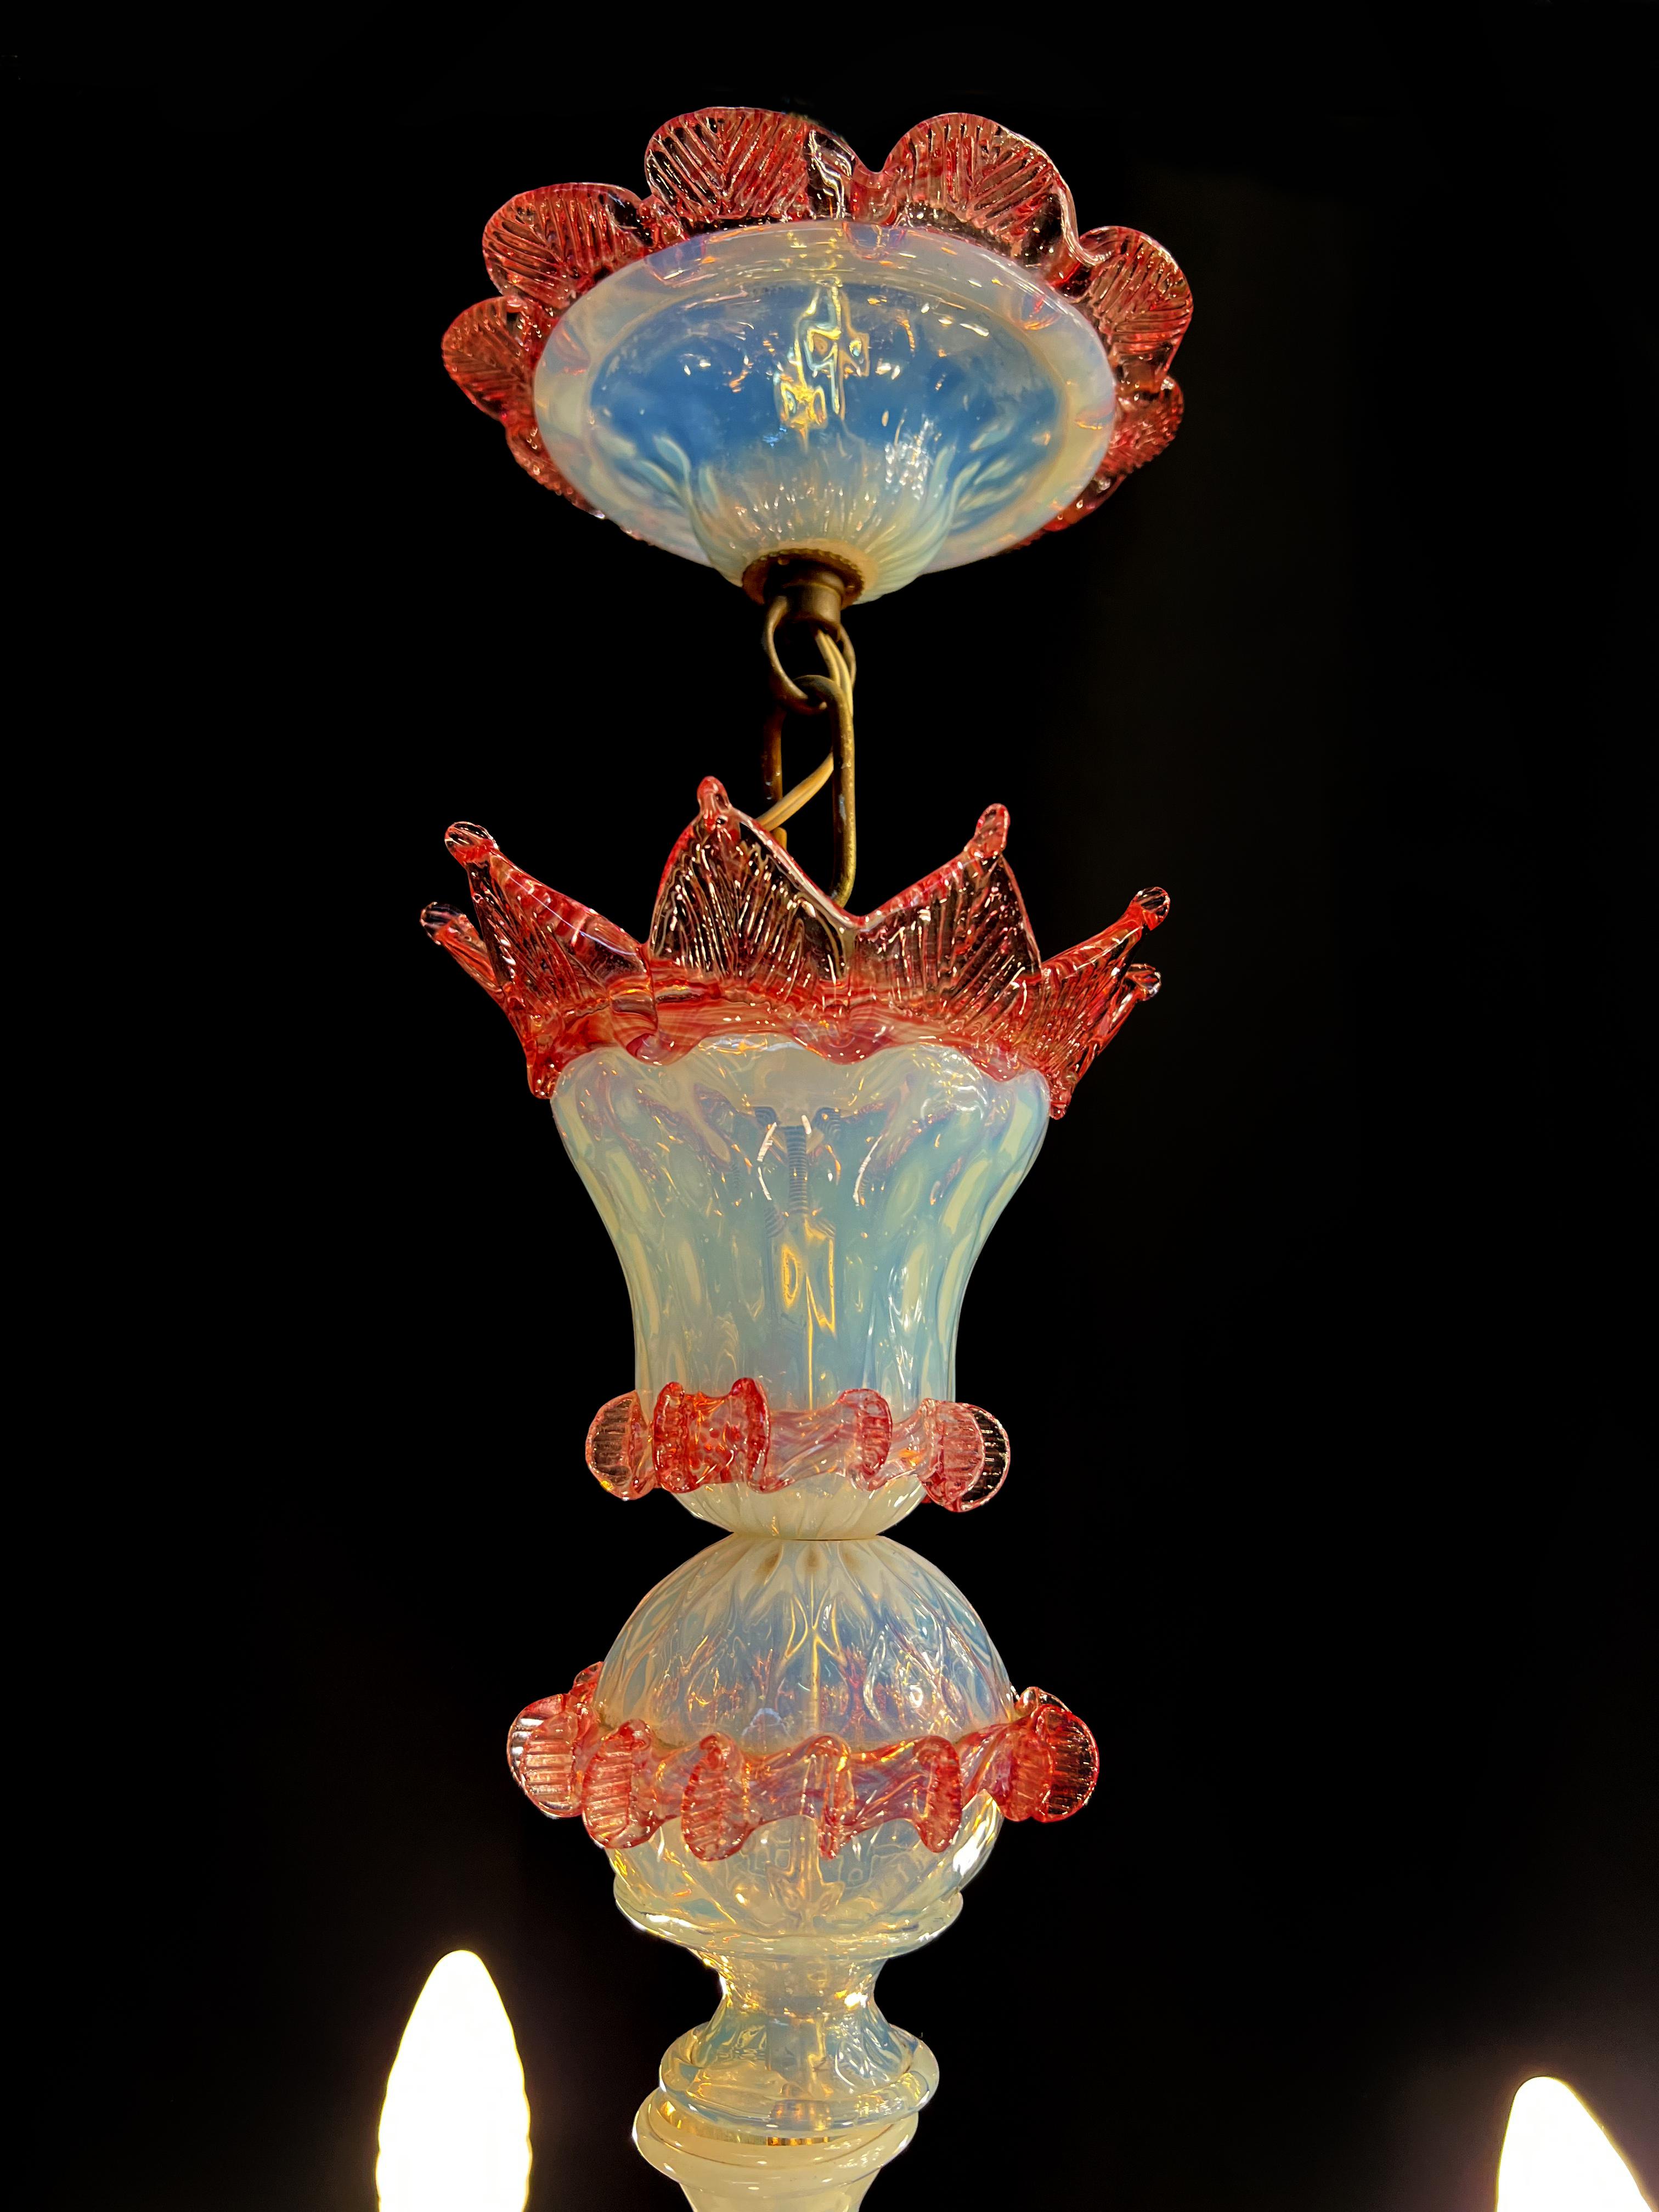 Charming Light Blue and Pink Venetian Chandelier, Murano, 1950s For Sale 2